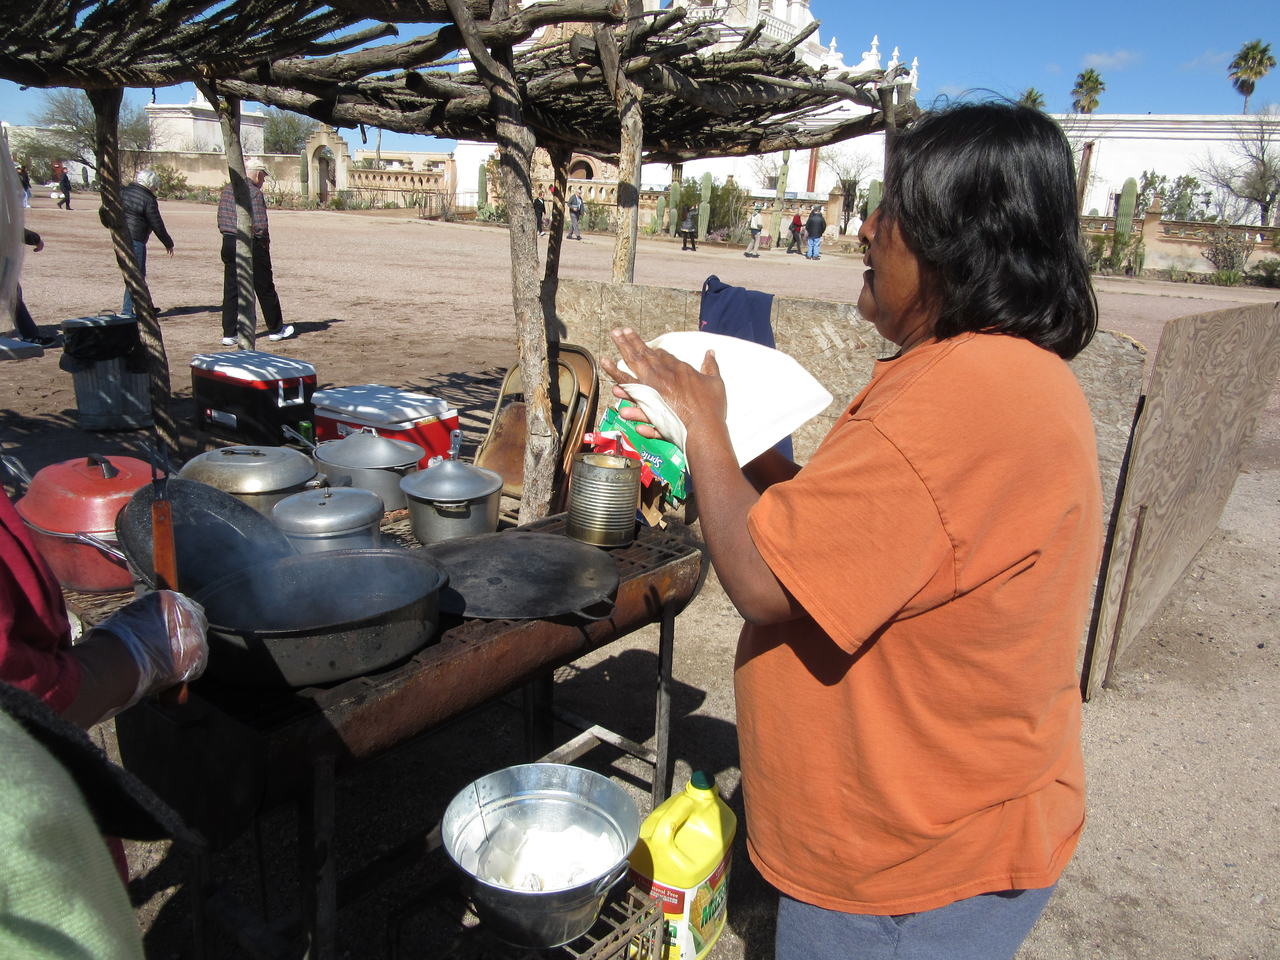 Indian frying bread being made at Mission San Xavier del Bac, Tucson Arizona